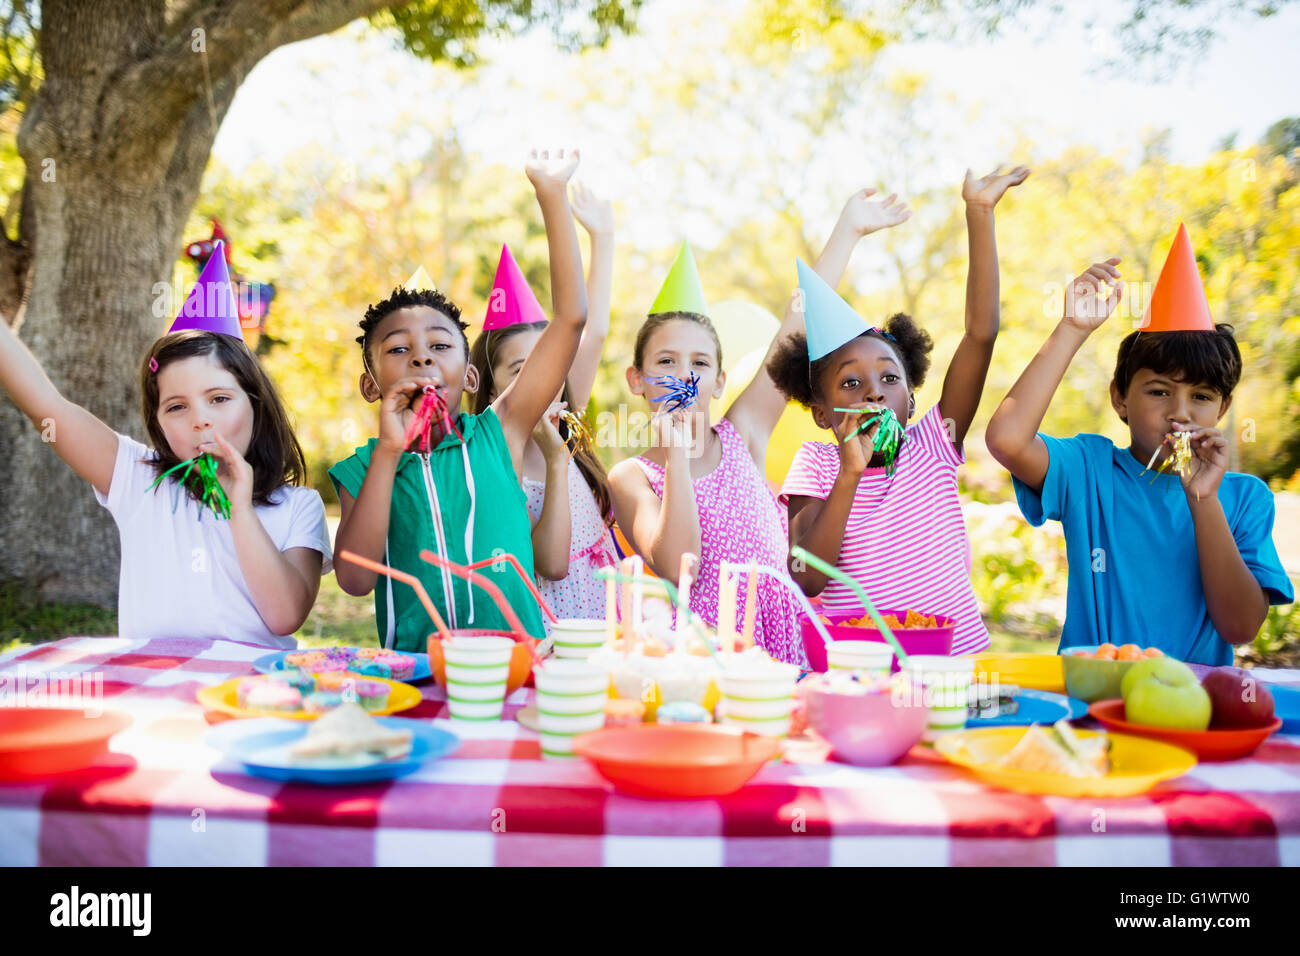 Cute children having fun during a birthday party Stock Photo